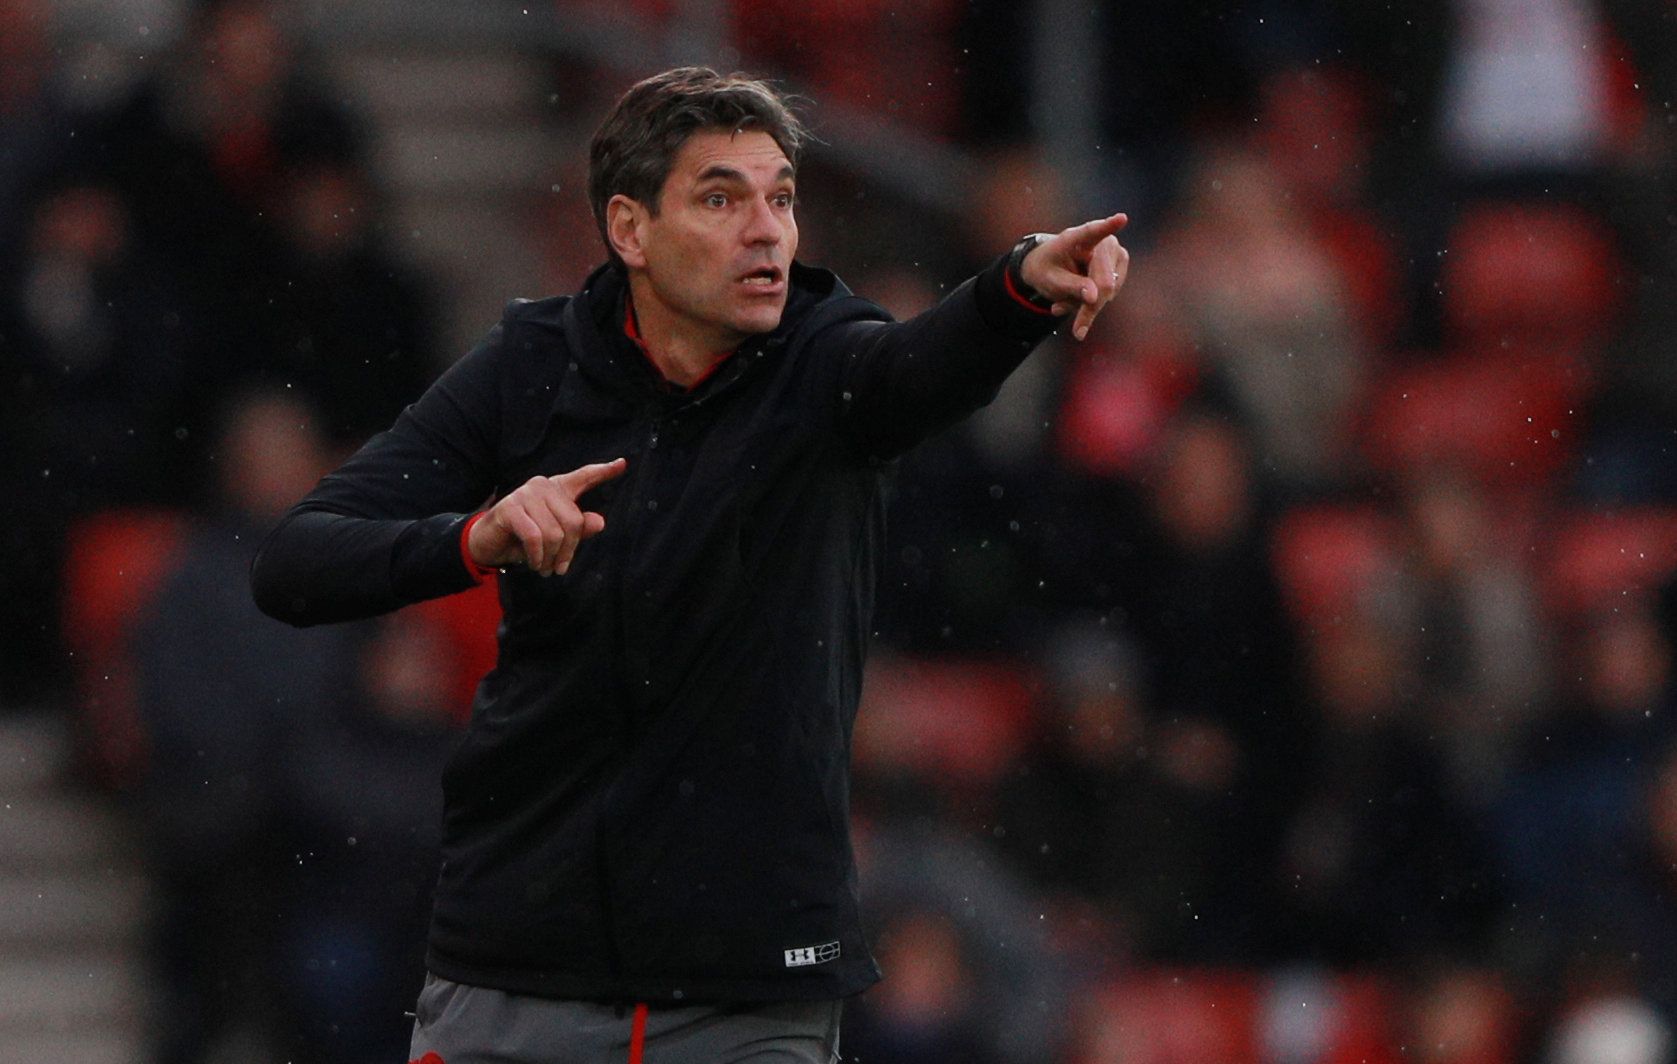 Soccer Football - Premier League - Southampton vs Stoke City - St Mary's Stadium, Southampton, Britain - March 3, 2018   Southampton manager Mauricio Pellegrino gestures   REUTERS/Ian Walton    EDITORIAL USE ONLY. No use with unauthorized audio, video, data, fixture lists, club/league logos or 